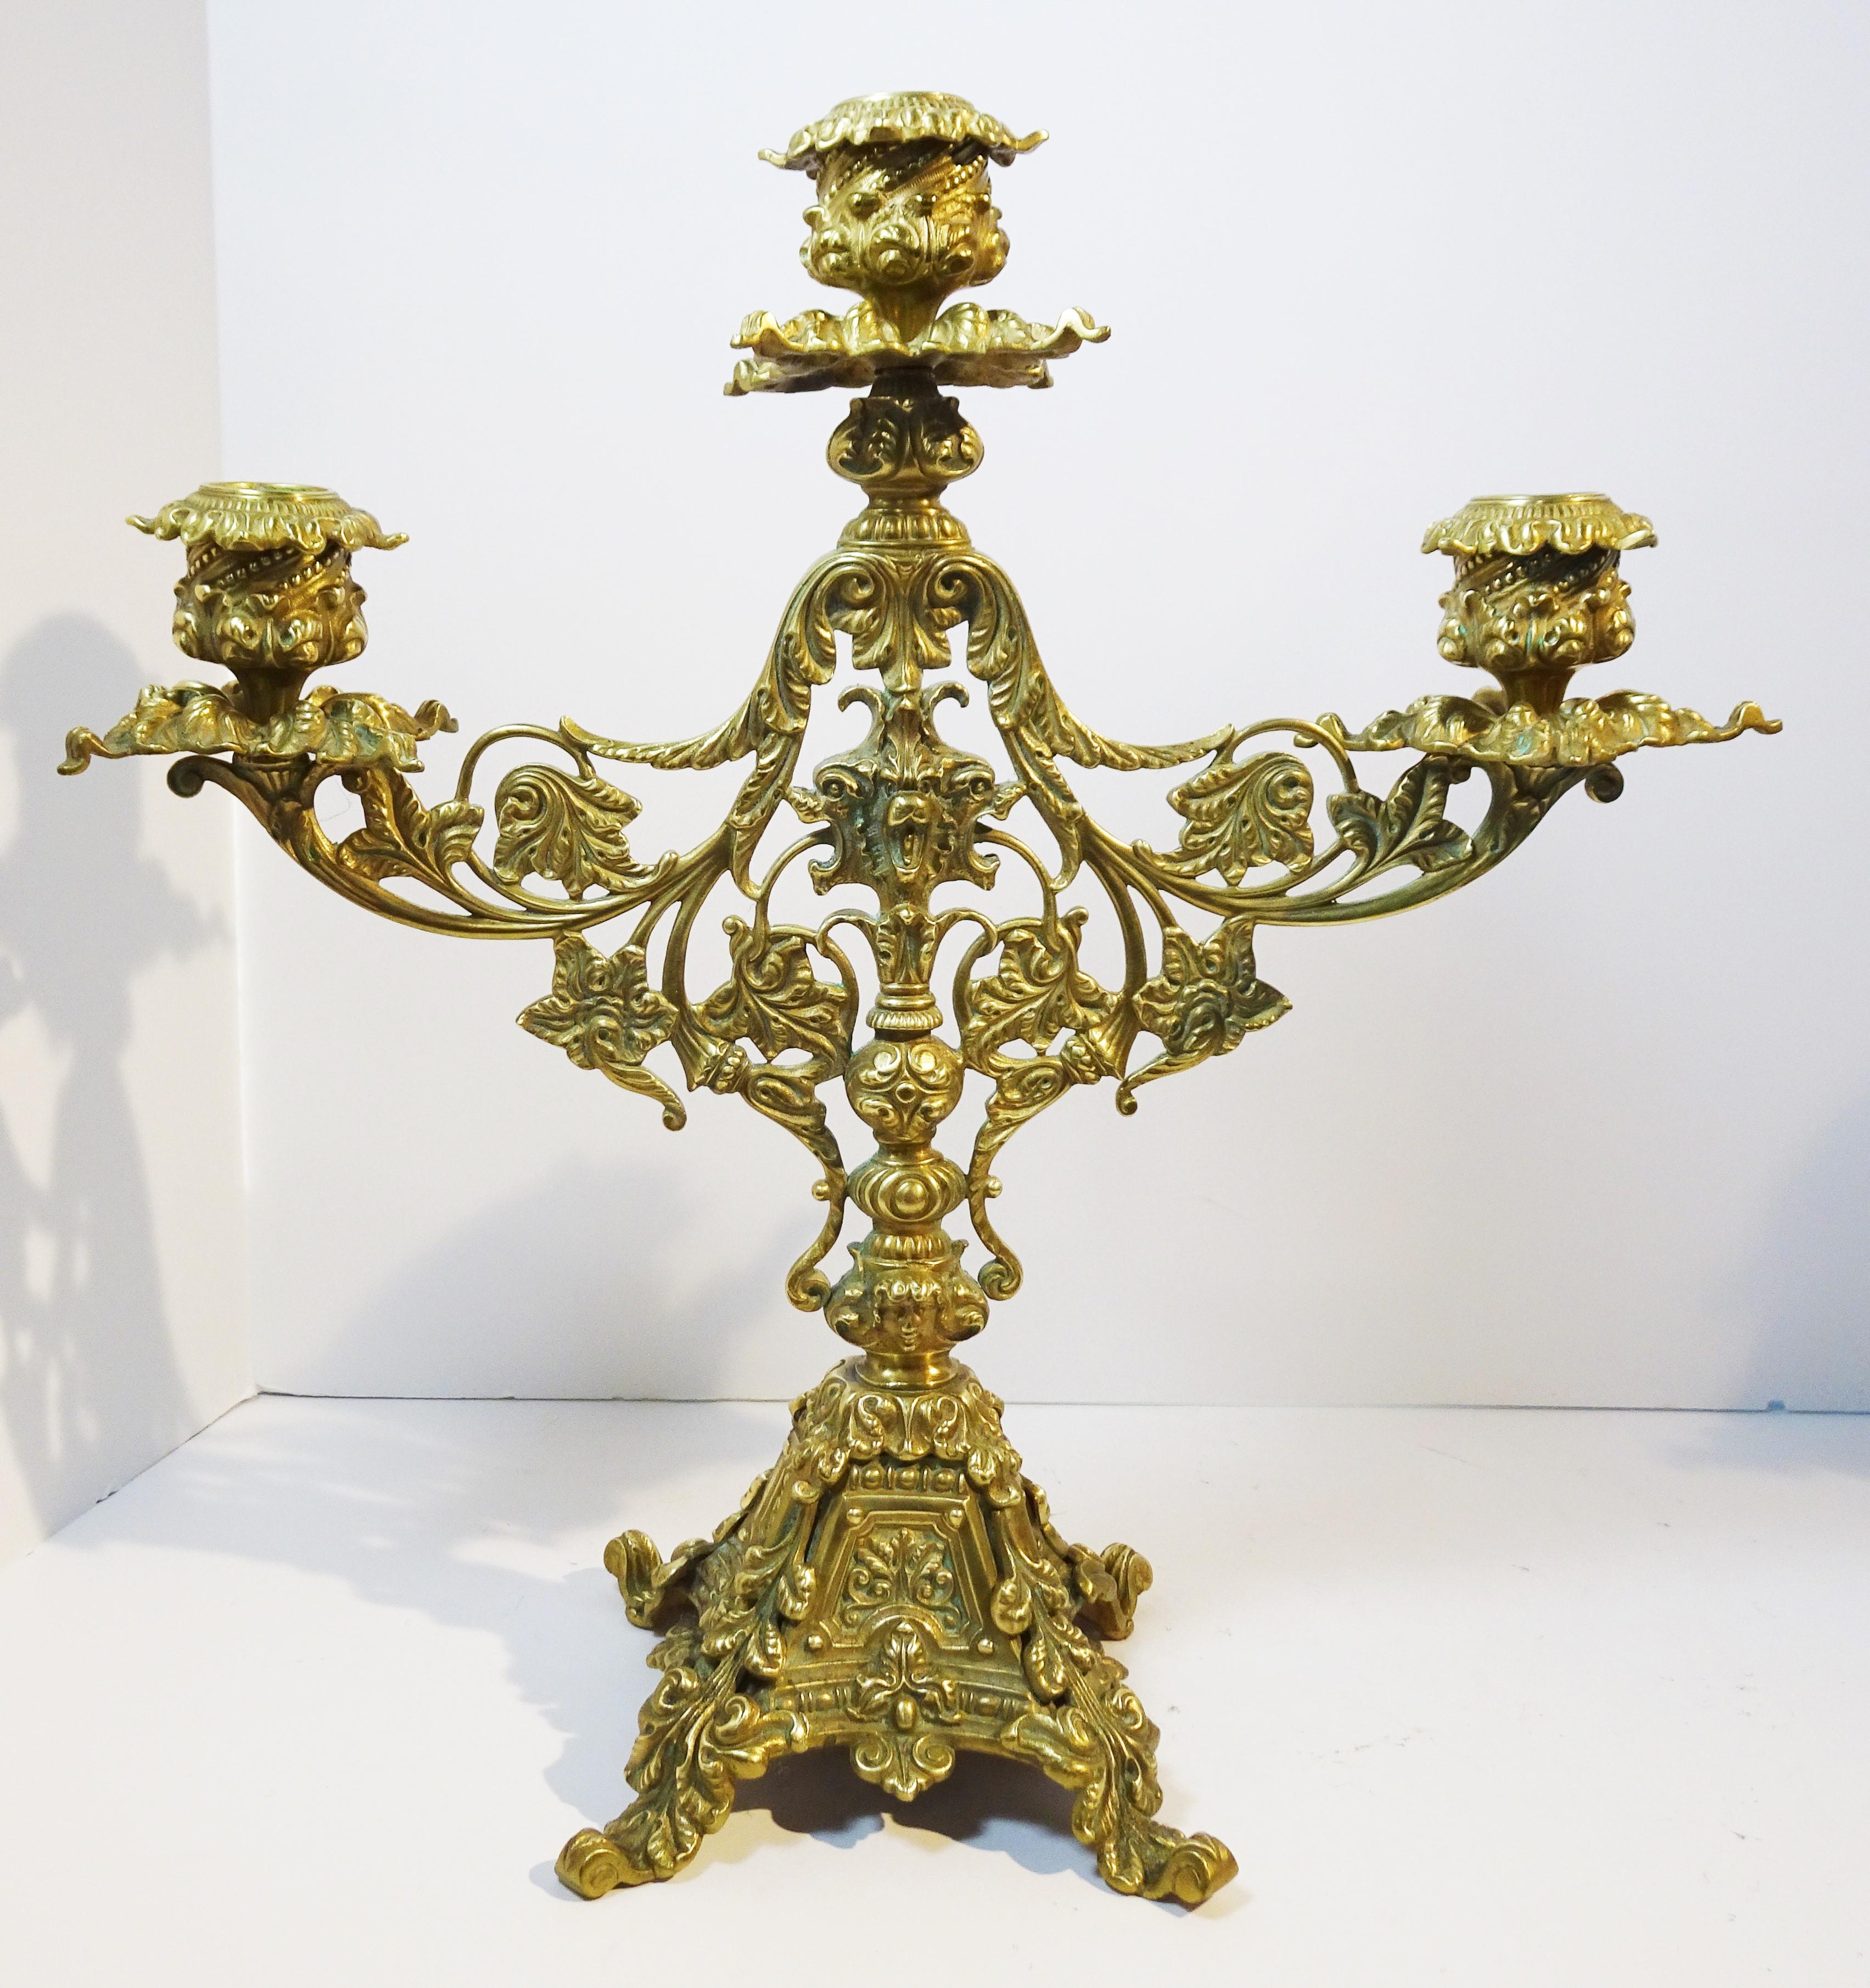 This Baroque-style pair of candelabra are elaborately decorated with leafy scrolls, stems and blossoms on all the surfaces, and are centered by a three. -headed lion over a ball-segmented shaft, the base of which is anchored by a human head on